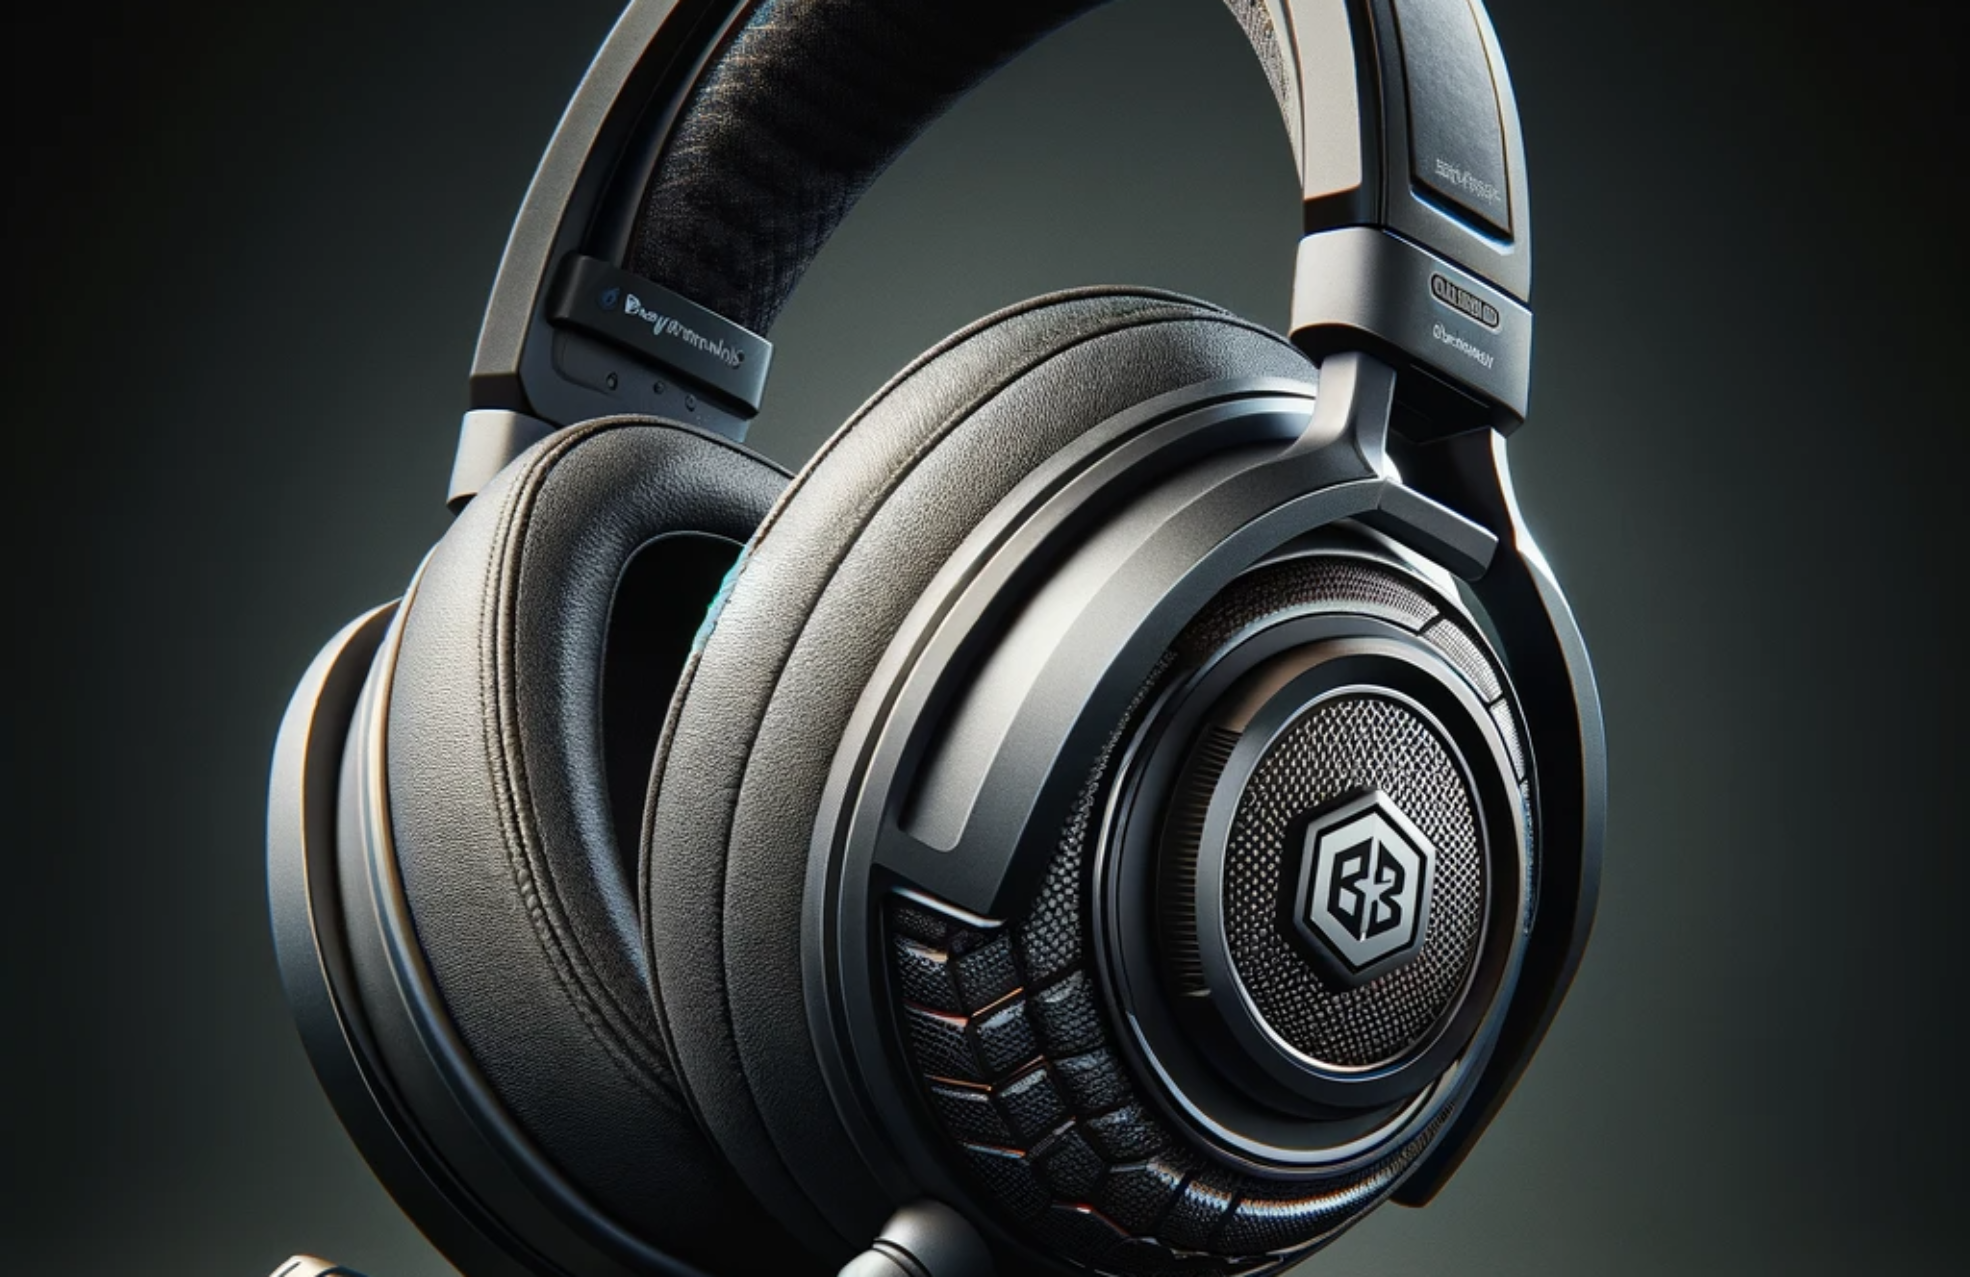 Hyper-realistic image of the Beyerdynamic DT 900 Pro X gaming headset, featuring its sleek, professional design with a focus on the high-quality texture of the materials, comfortable ear cups, and the iconic Beyerdynamic branding.